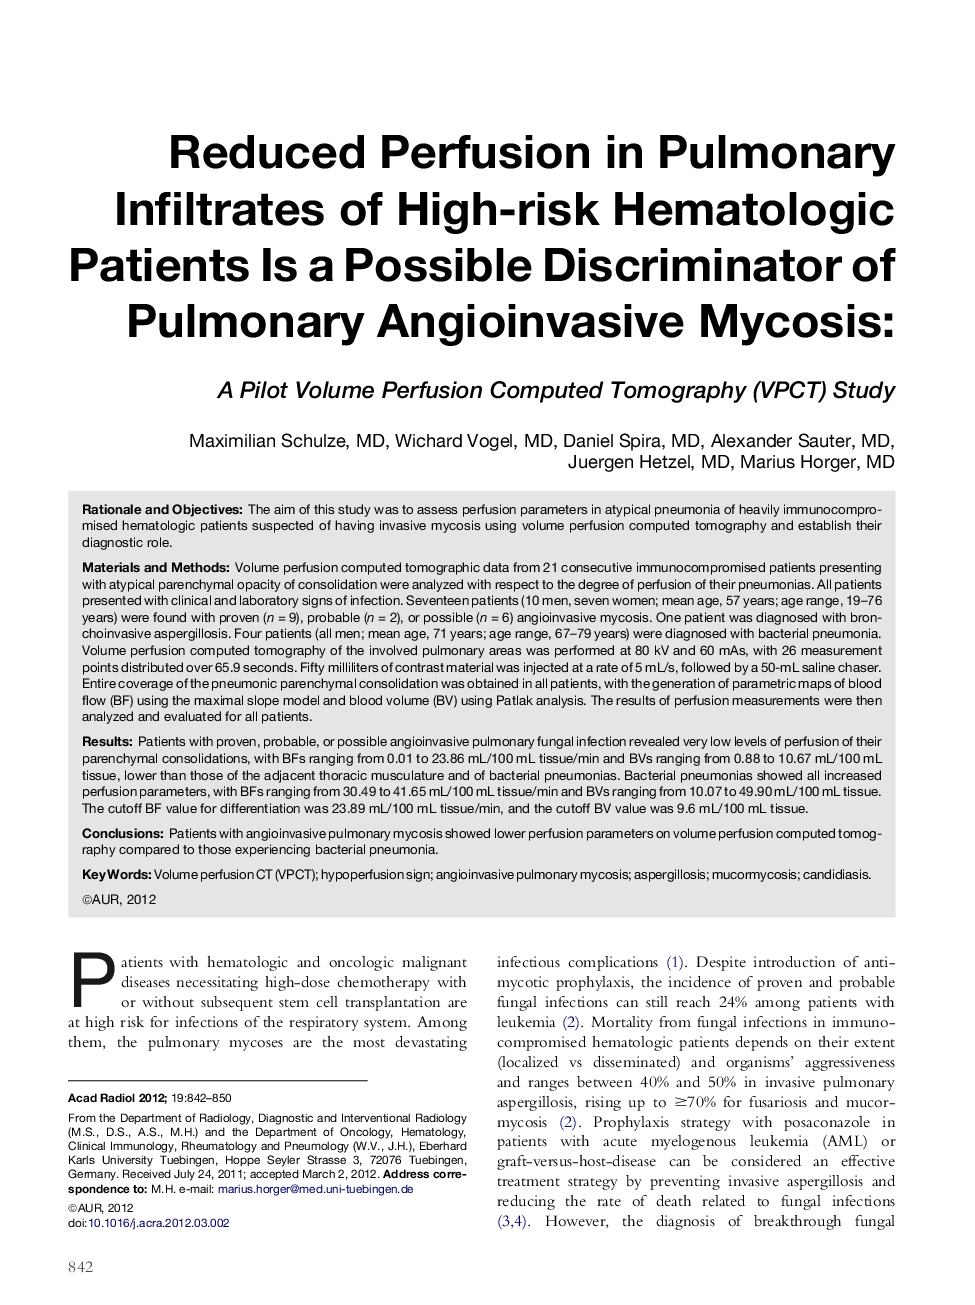 Reduced Perfusion in Pulmonary Infiltrates of High-risk Hematologic Patients Is a Possible Discriminator of Pulmonary Angioinvasive Mycosis